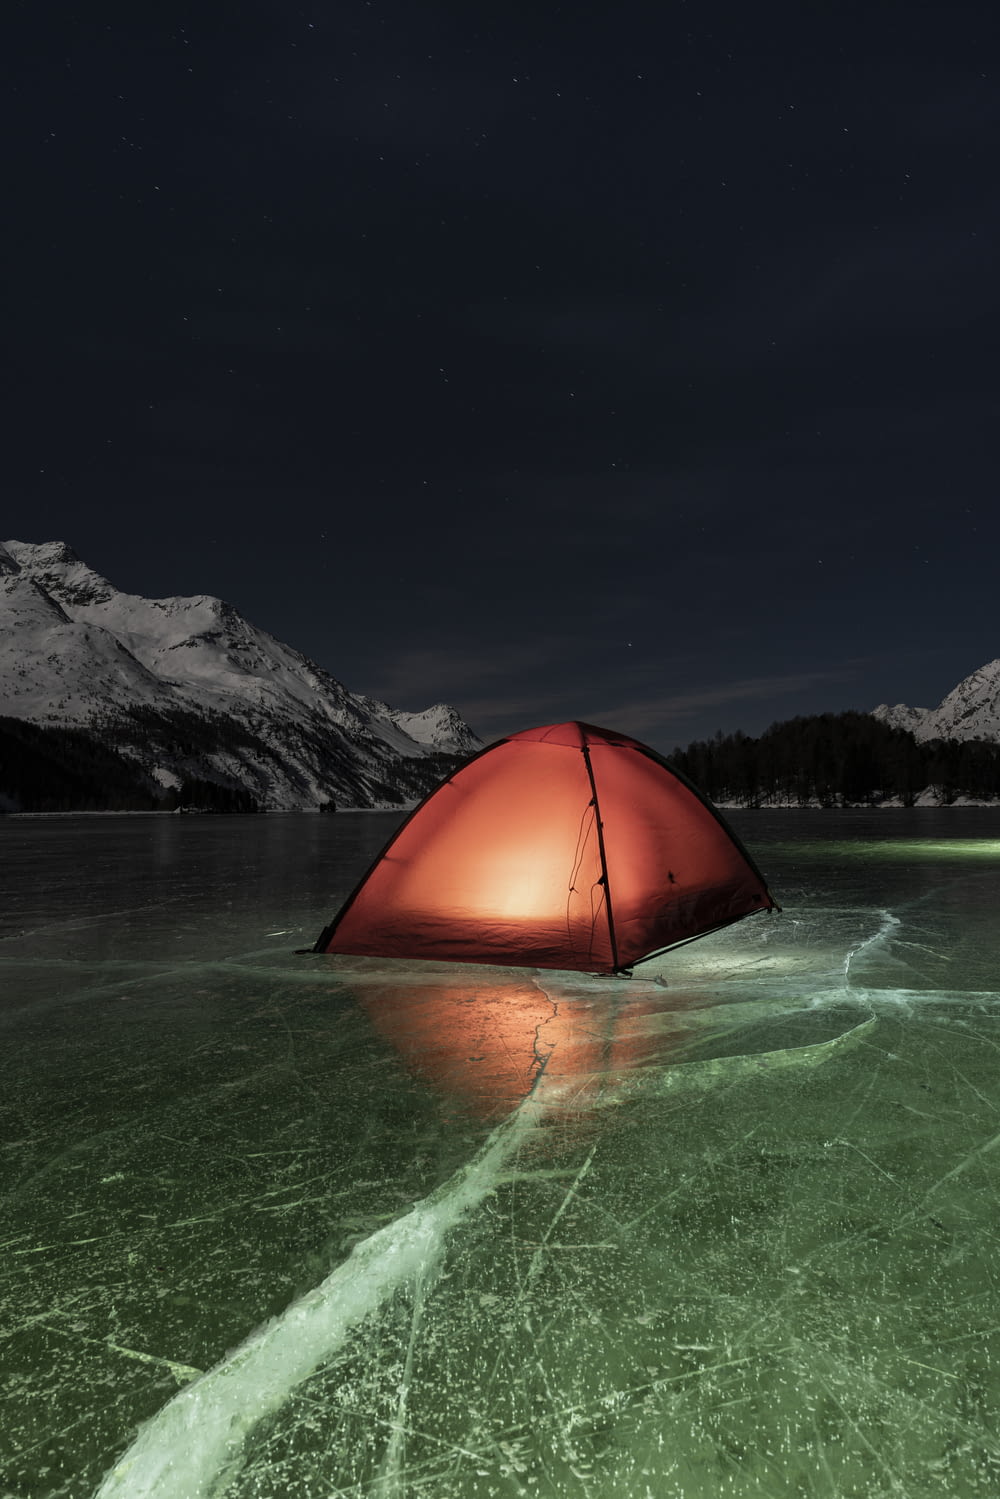 orange dome tent on green water near mountain during night time